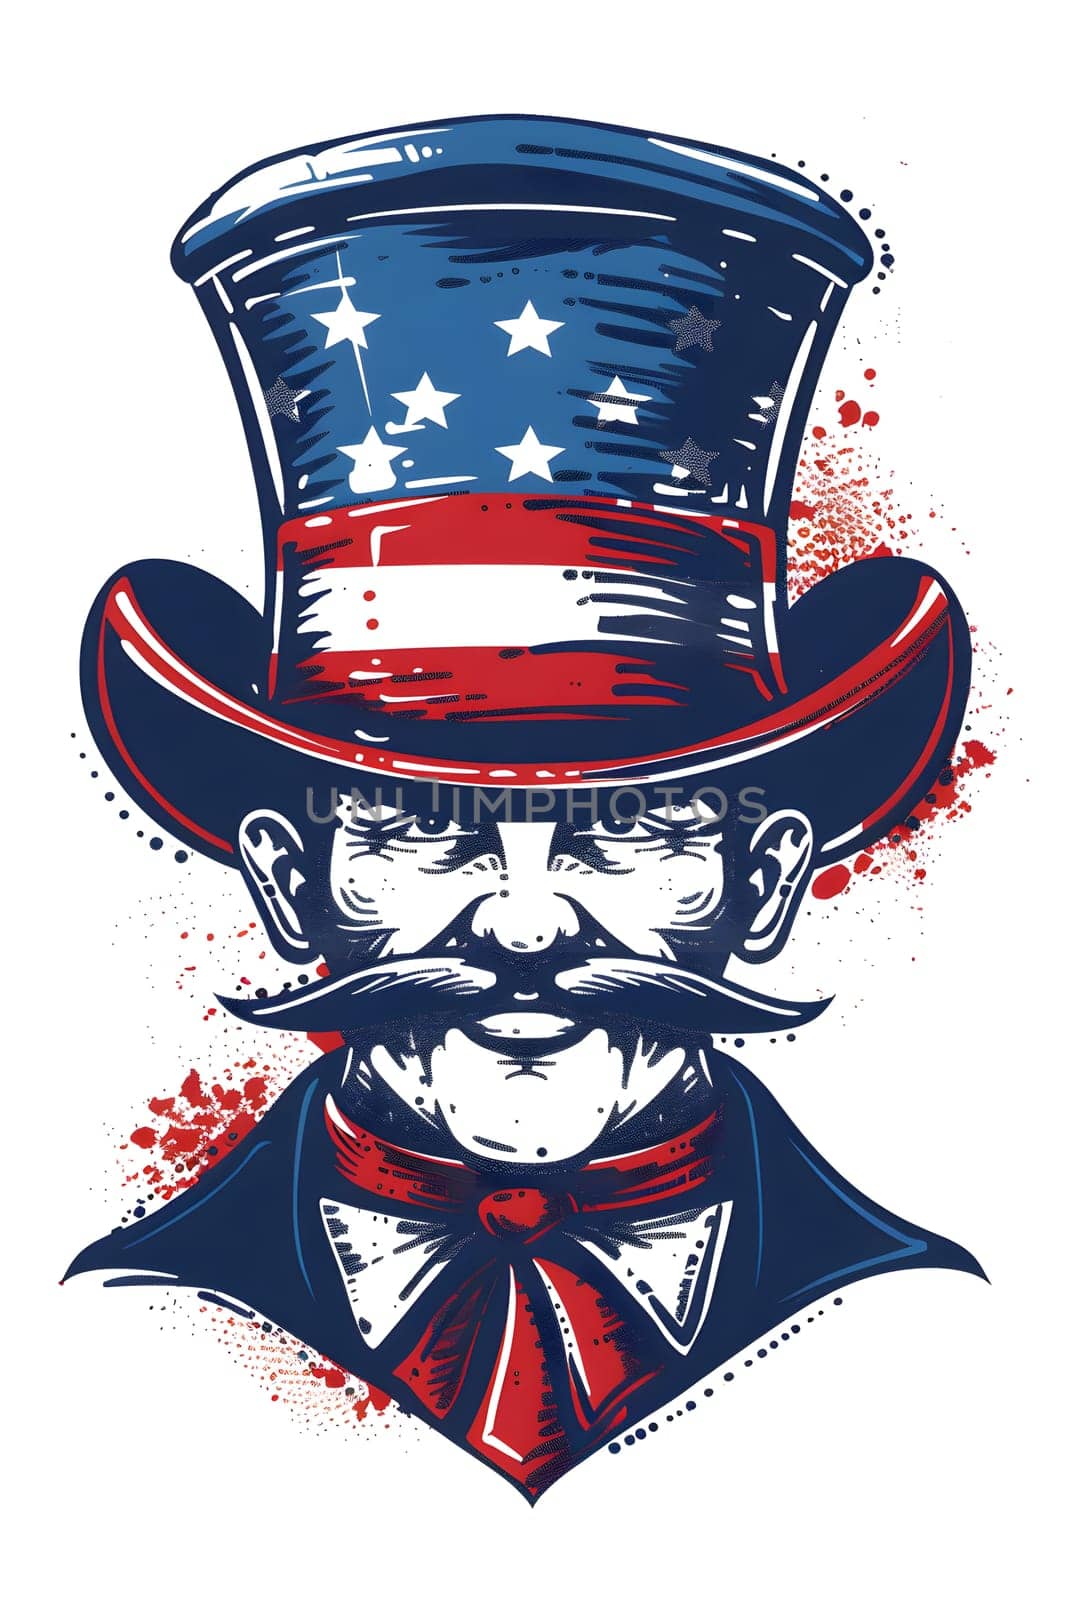 Man in mustache dons top hat with American flag, a patriotic gesture in costume by Nadtochiy